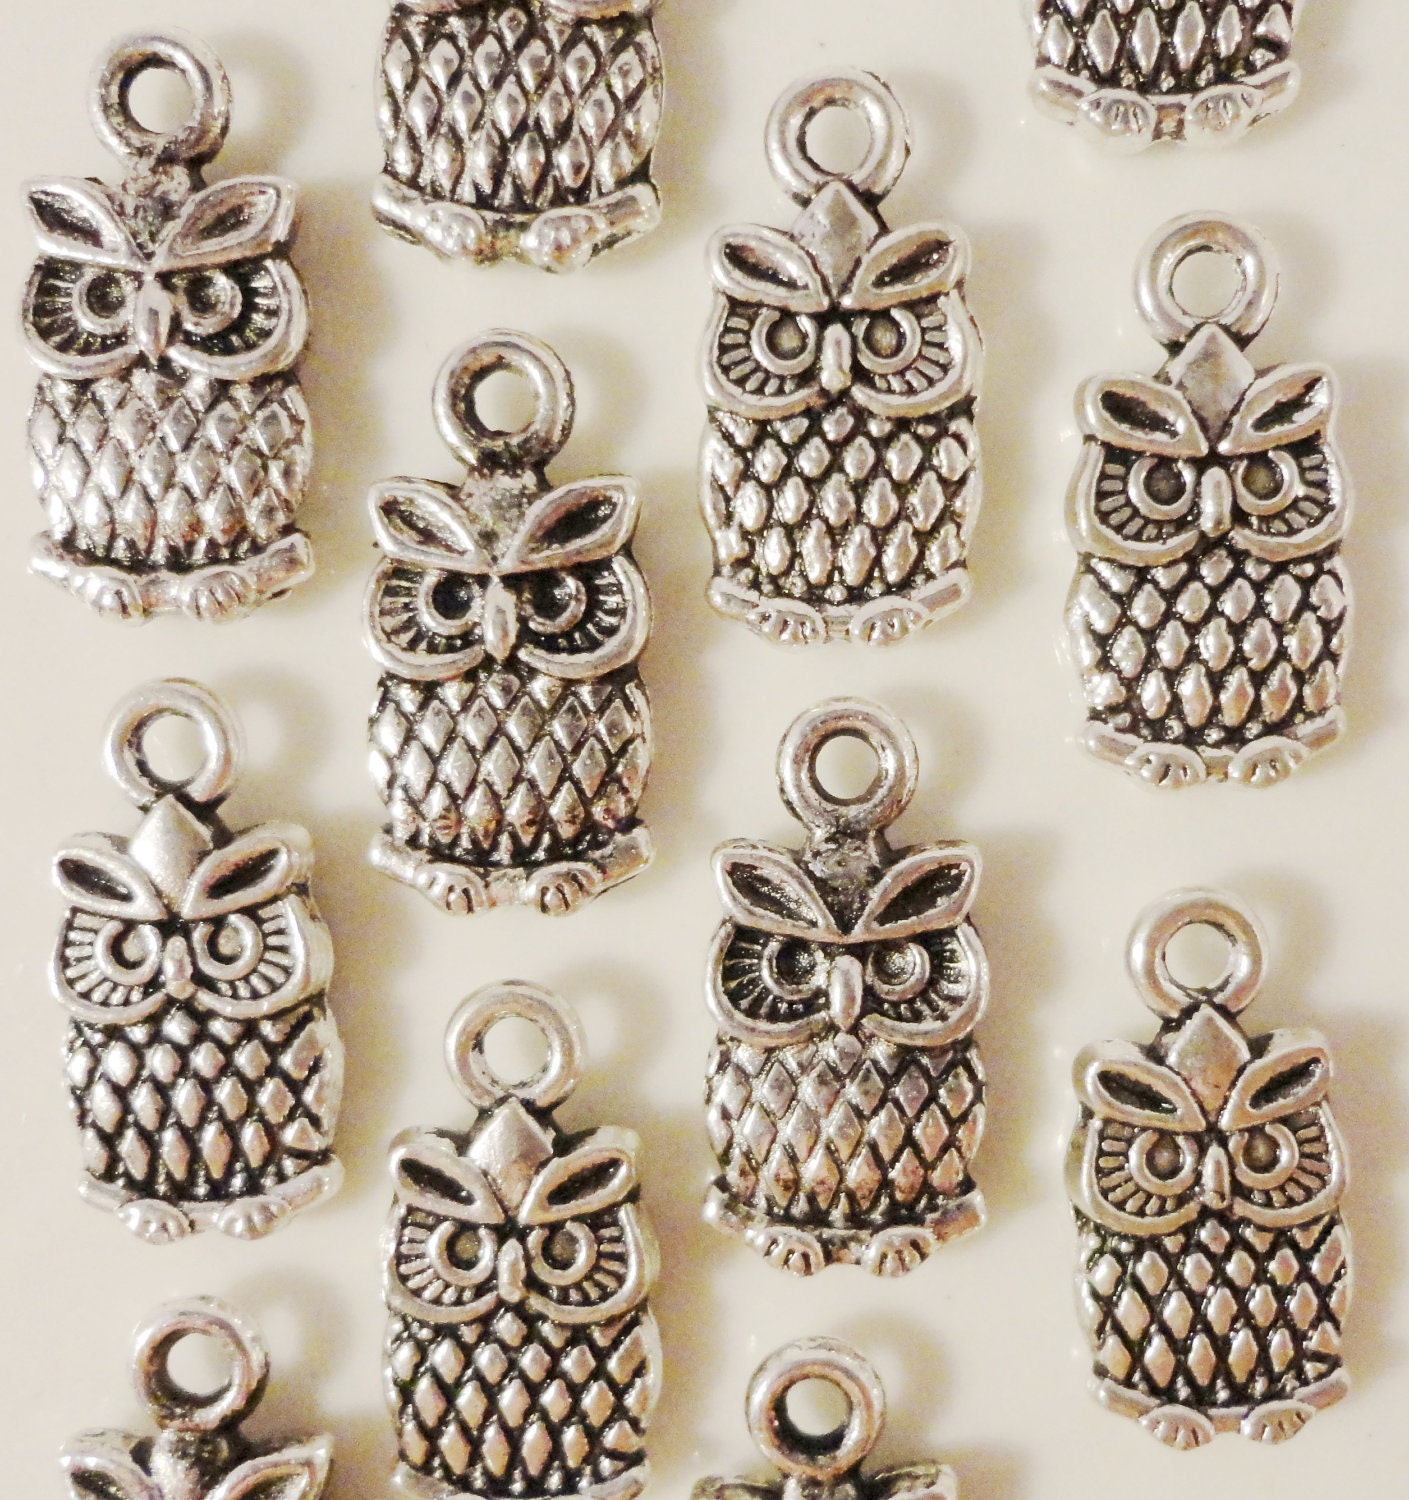 Silver Owl Charms 15x7mm Antique Silver Tone Metal Small Owl Bird Charm Pendant Jewelry Findings 12pcs - BusyBeeBeadSupplies